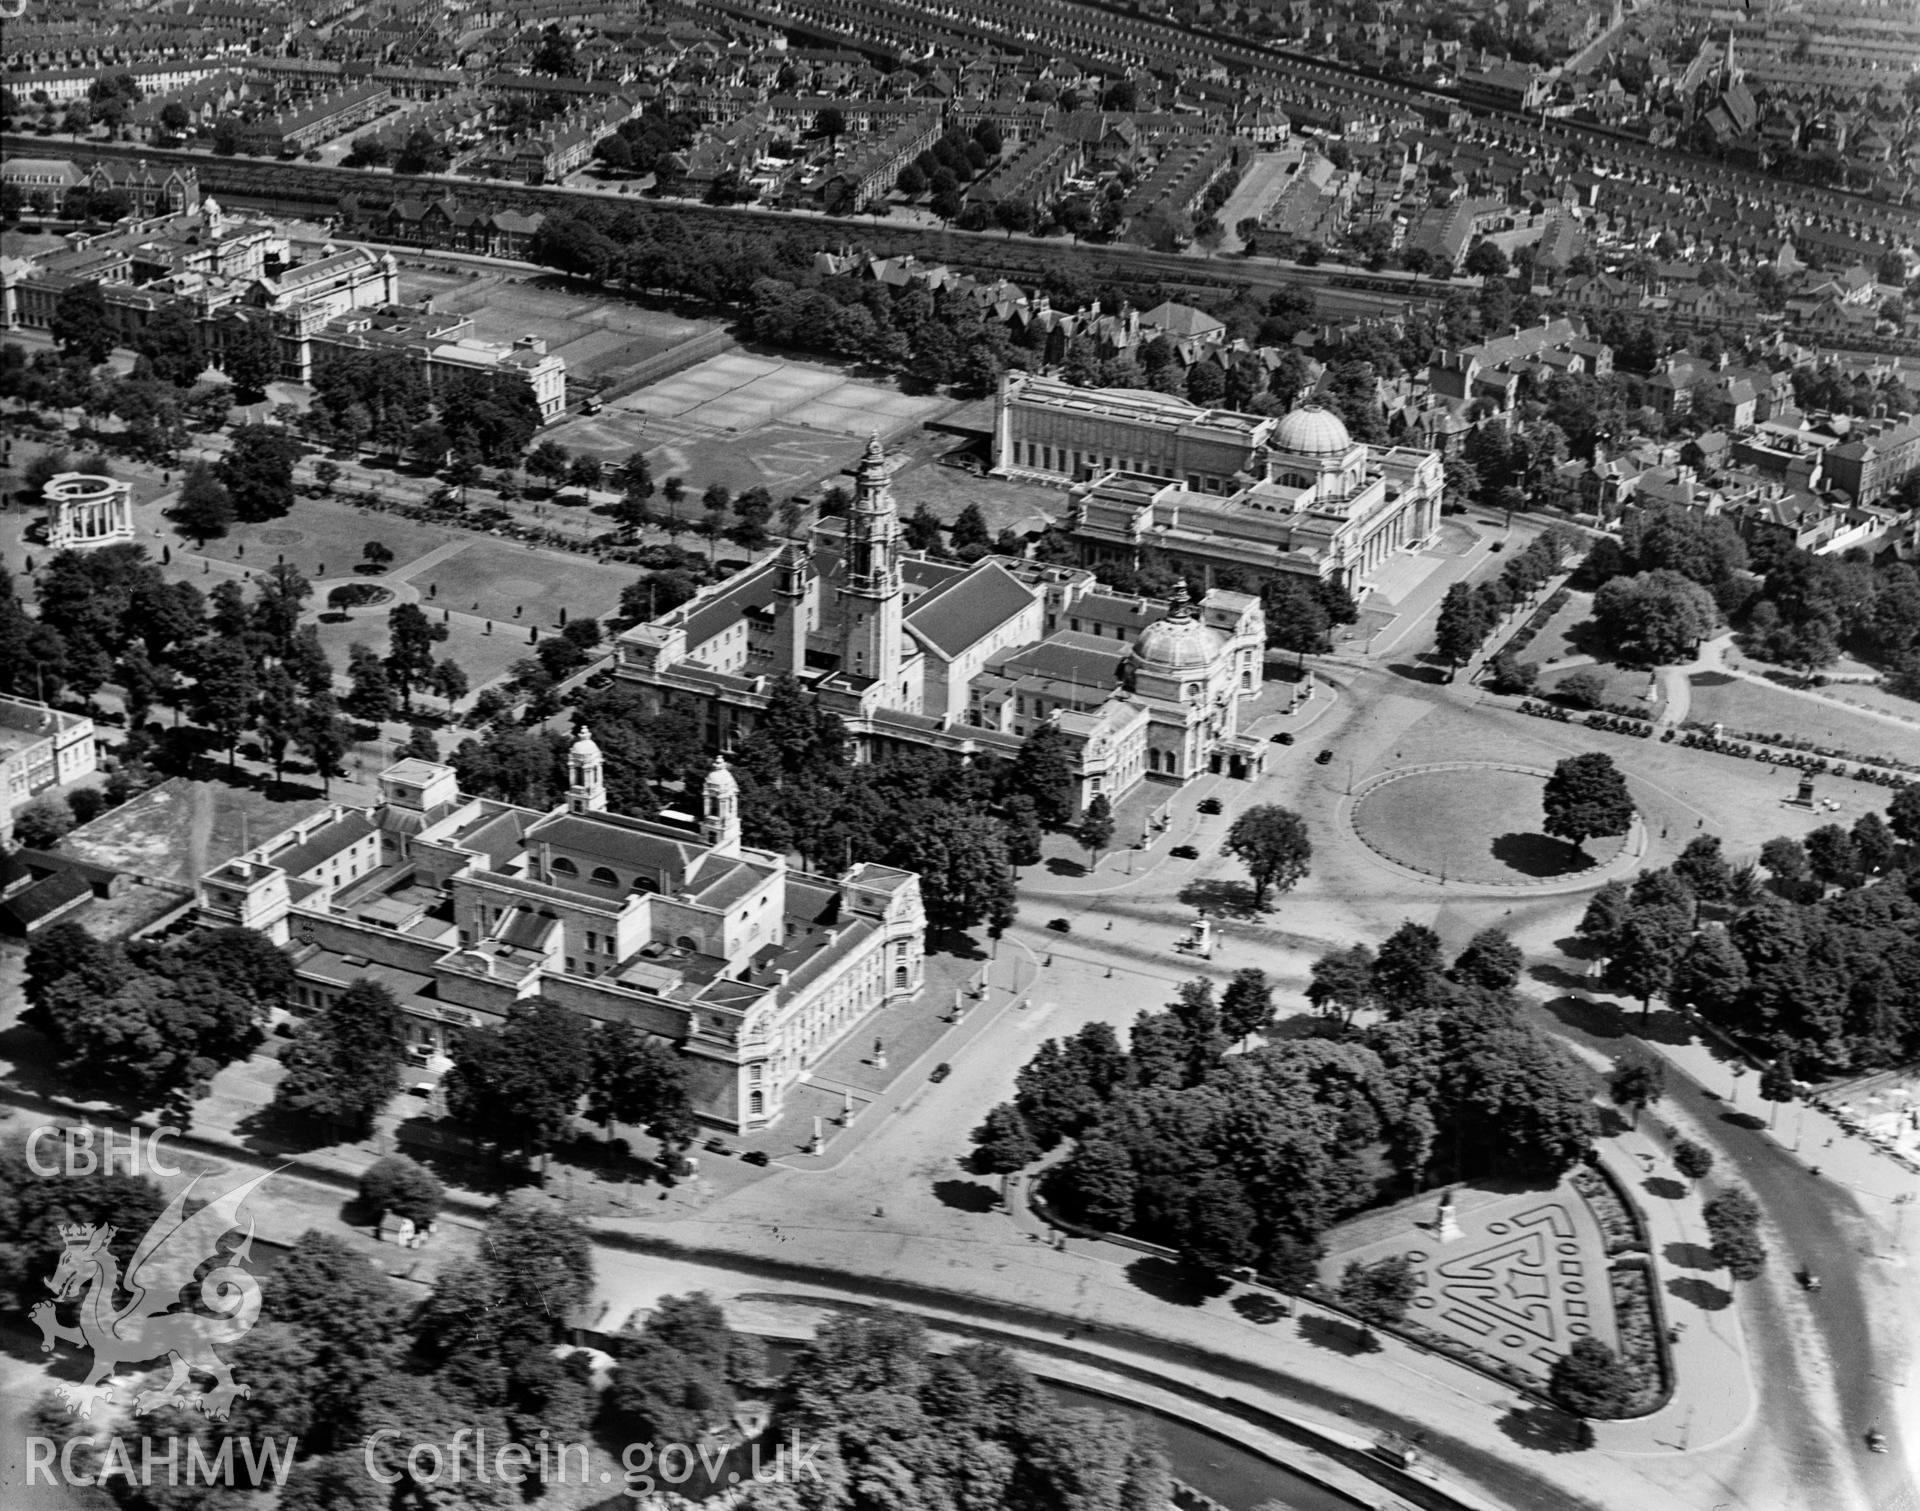 View of Cathays Park, Cardiff showing civic centre and war memorial, oblique aerial view. 5?x4? black and white glass plate negative.